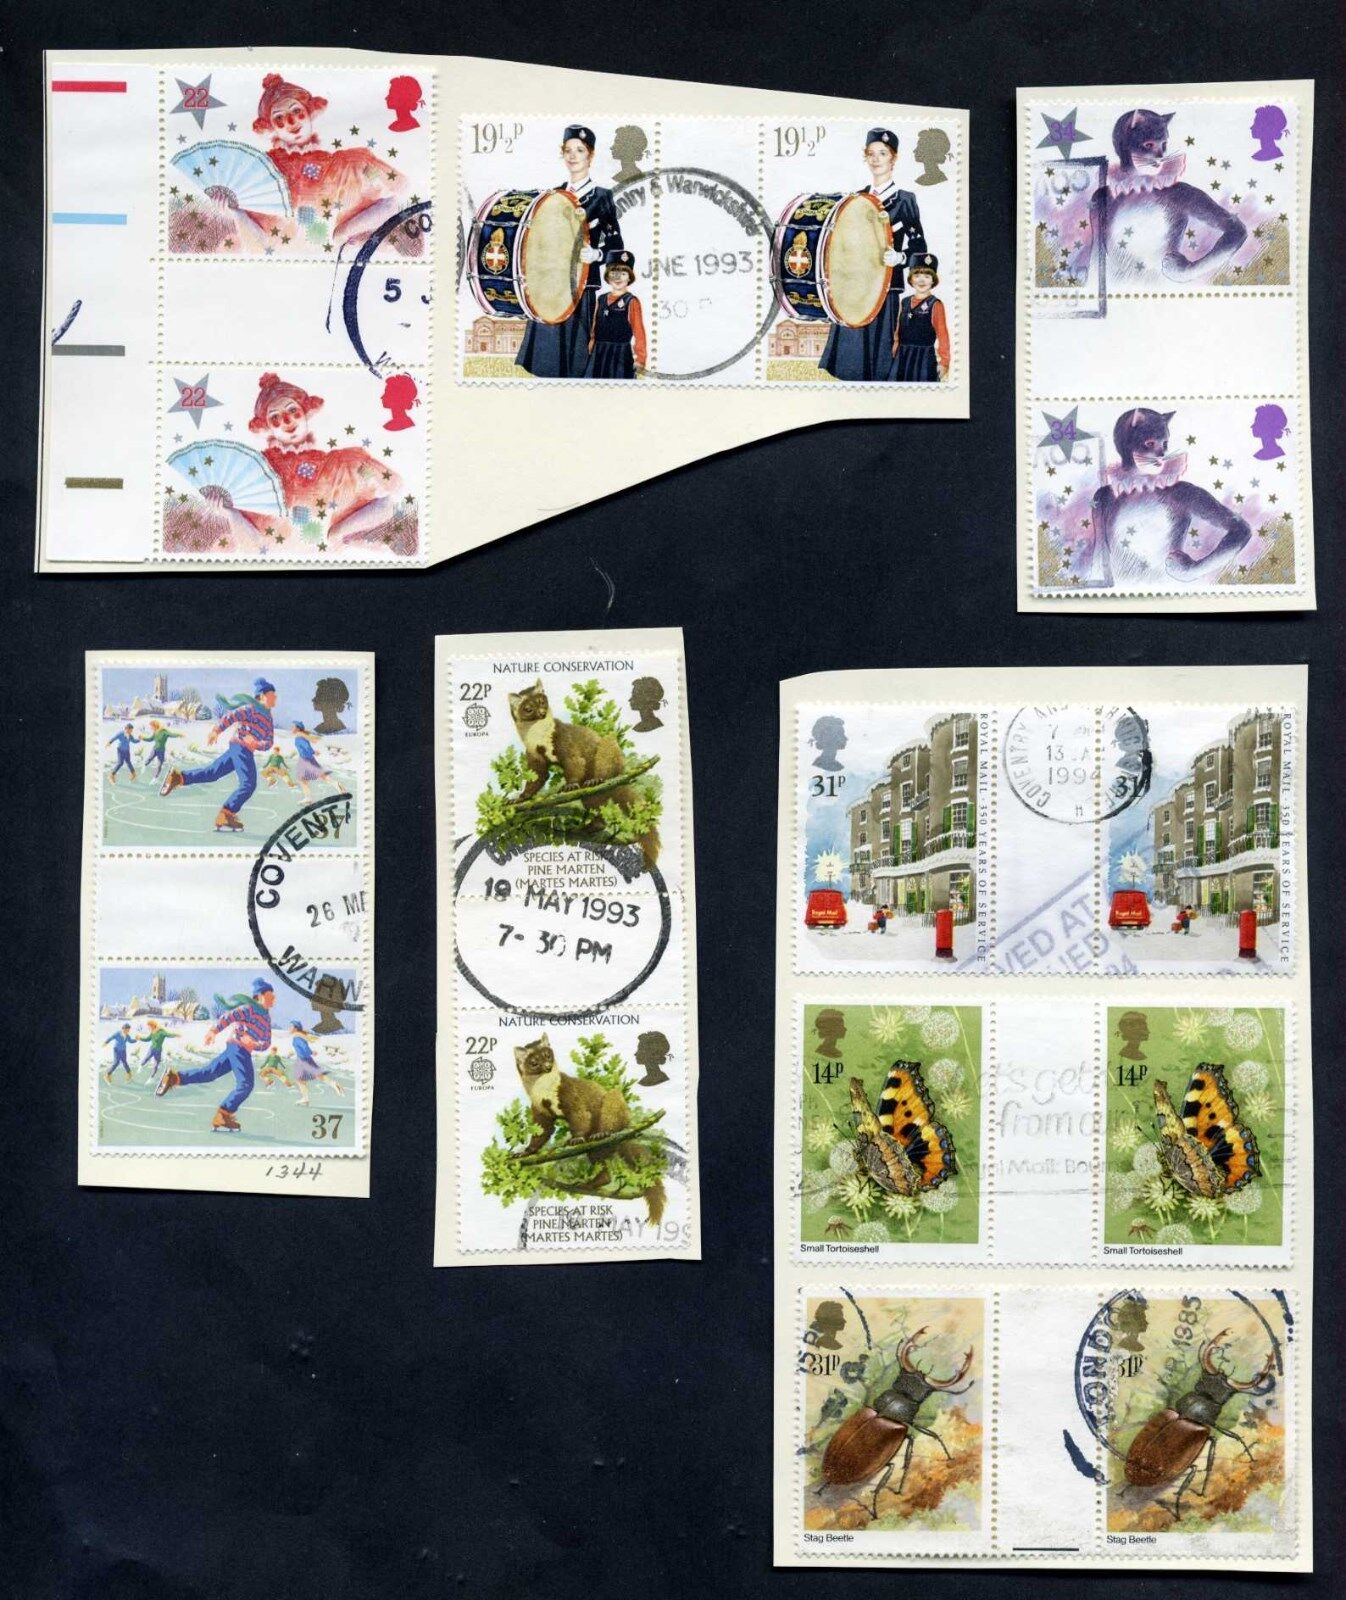 Lot of 19 stamps, United Kingdom, 12 Gutter Pairs, 1 First Day Cover Без бренда - фотография #2